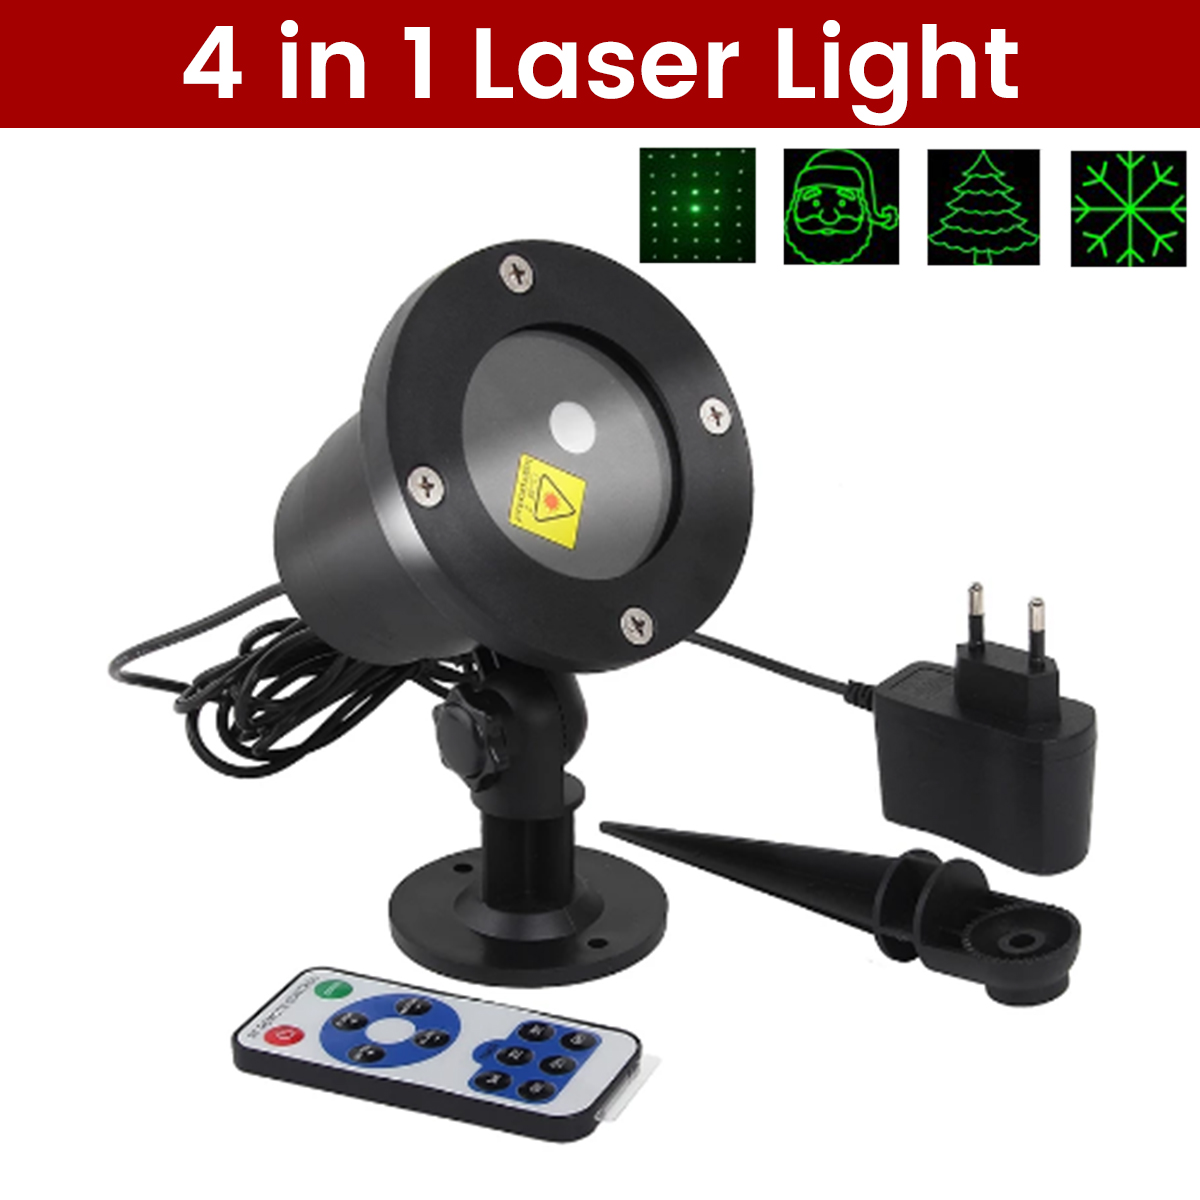 Christmas-Party-LED-Light-Full-Sky-Star-Laser-Projector-Red-Green-Laser-Lamp-For-Outdoor-Garden-Lawn-1917281-2